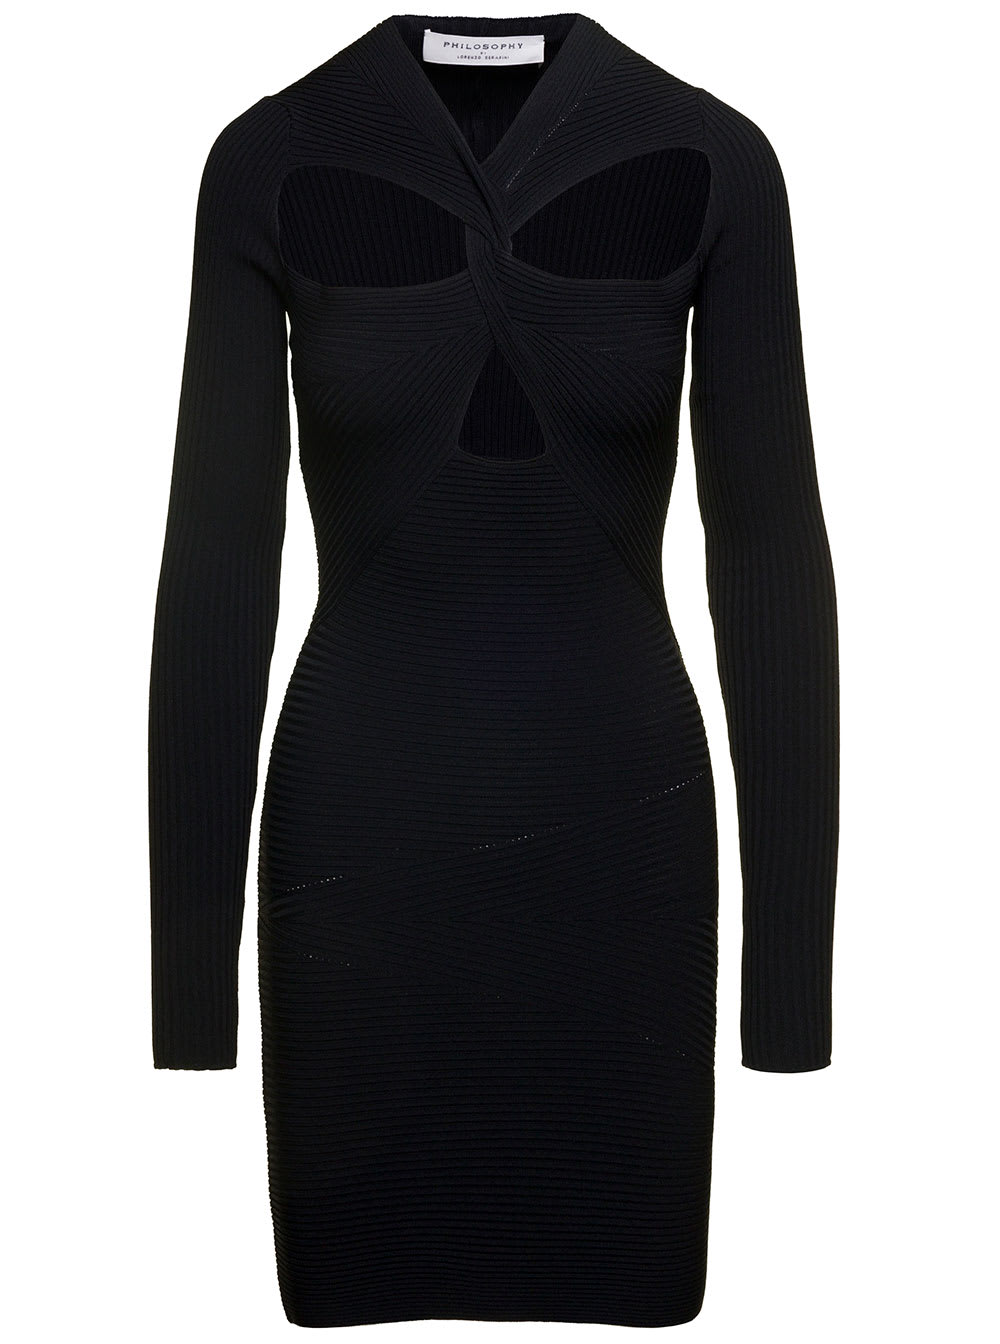 PHILOSOPHY DI LORENZO SERAFINI MINI BLACK RIBBED DRESS WITH CUT-OUT DETAILS AT THE FRONT IN VISCOSE BLEND WOMAN